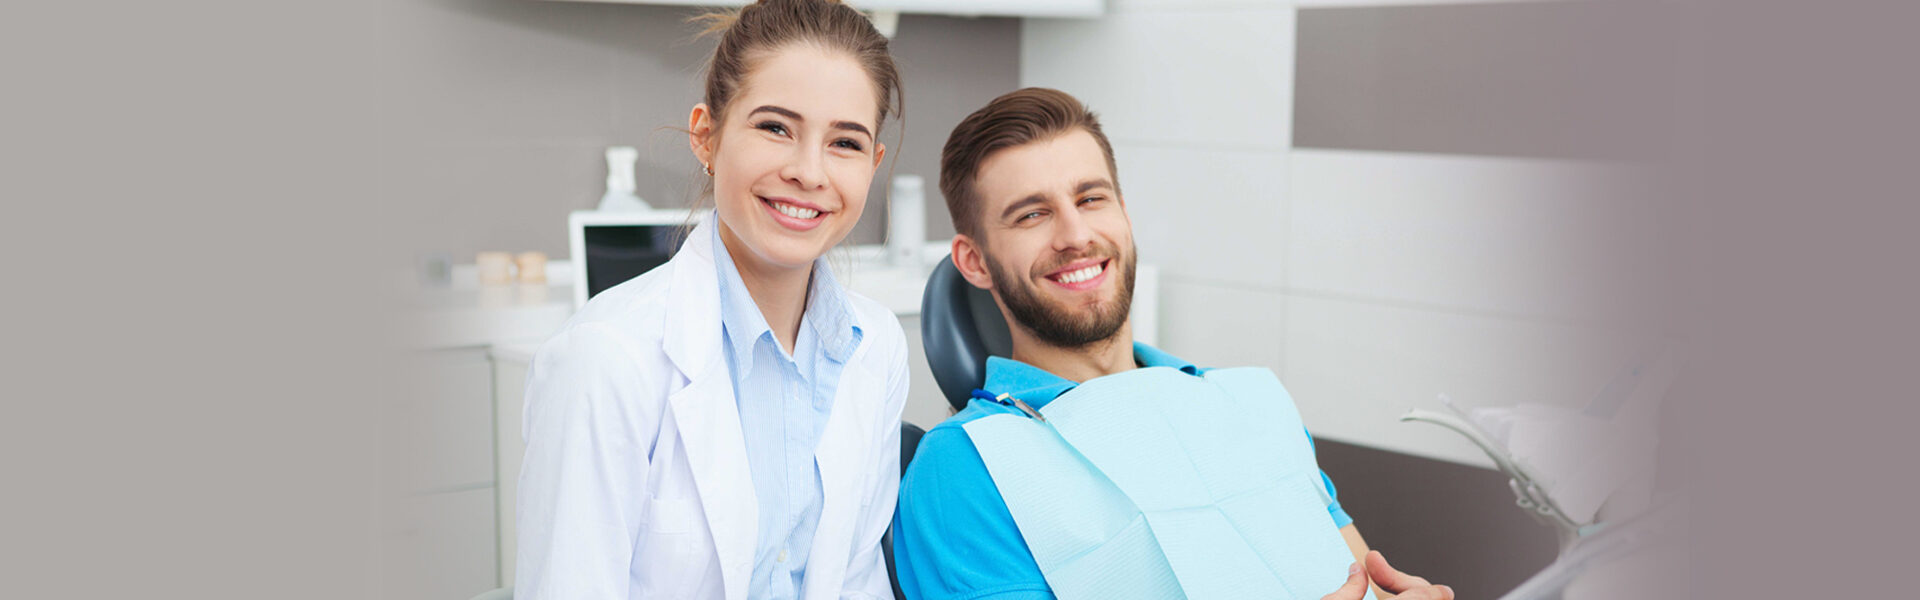 Complete Oral Exams in Great Neck & Hicksville, NY